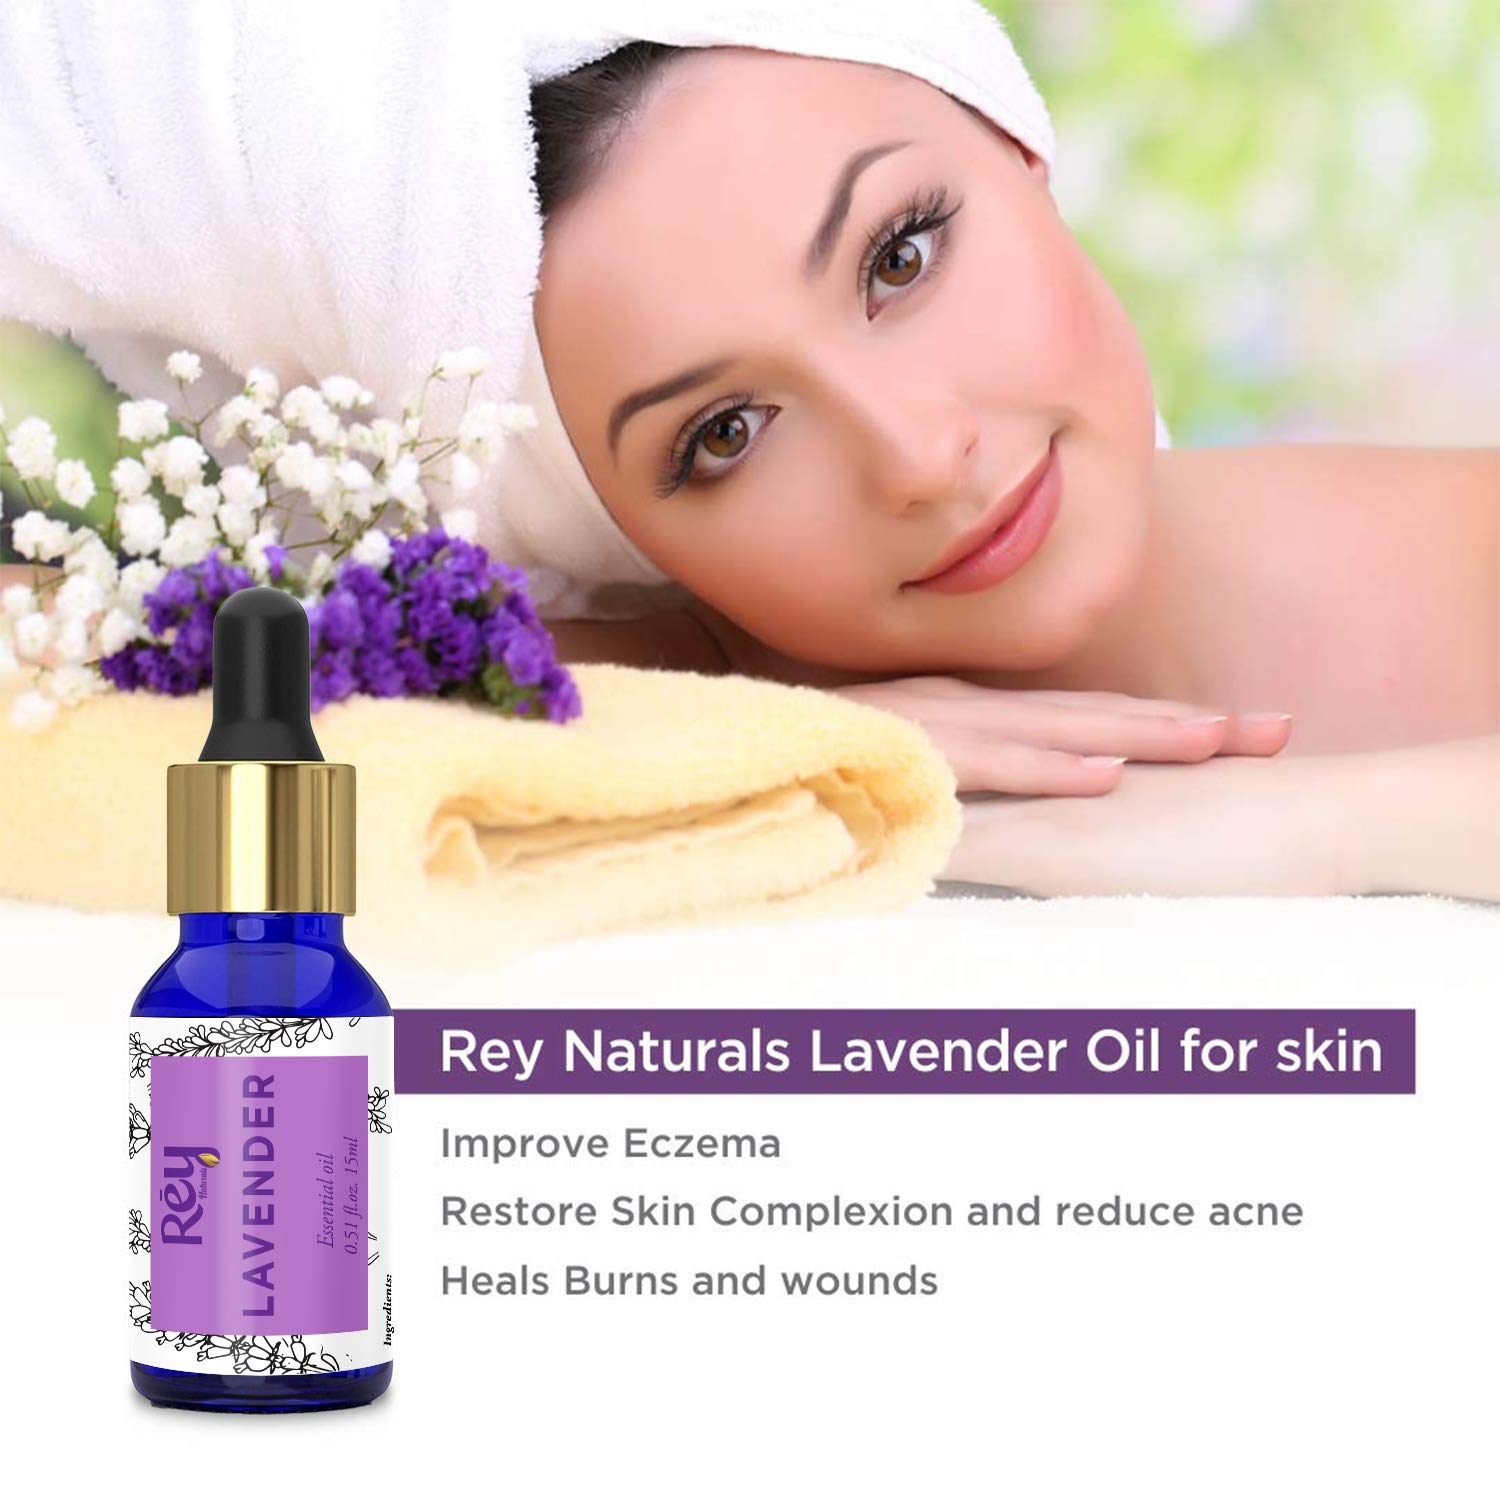 Rey Naturals® tea tree oil & lavender essential oils - Pure 100% Natural for Healthy Skin, Face, and Hair (15 ml + 15 ml)